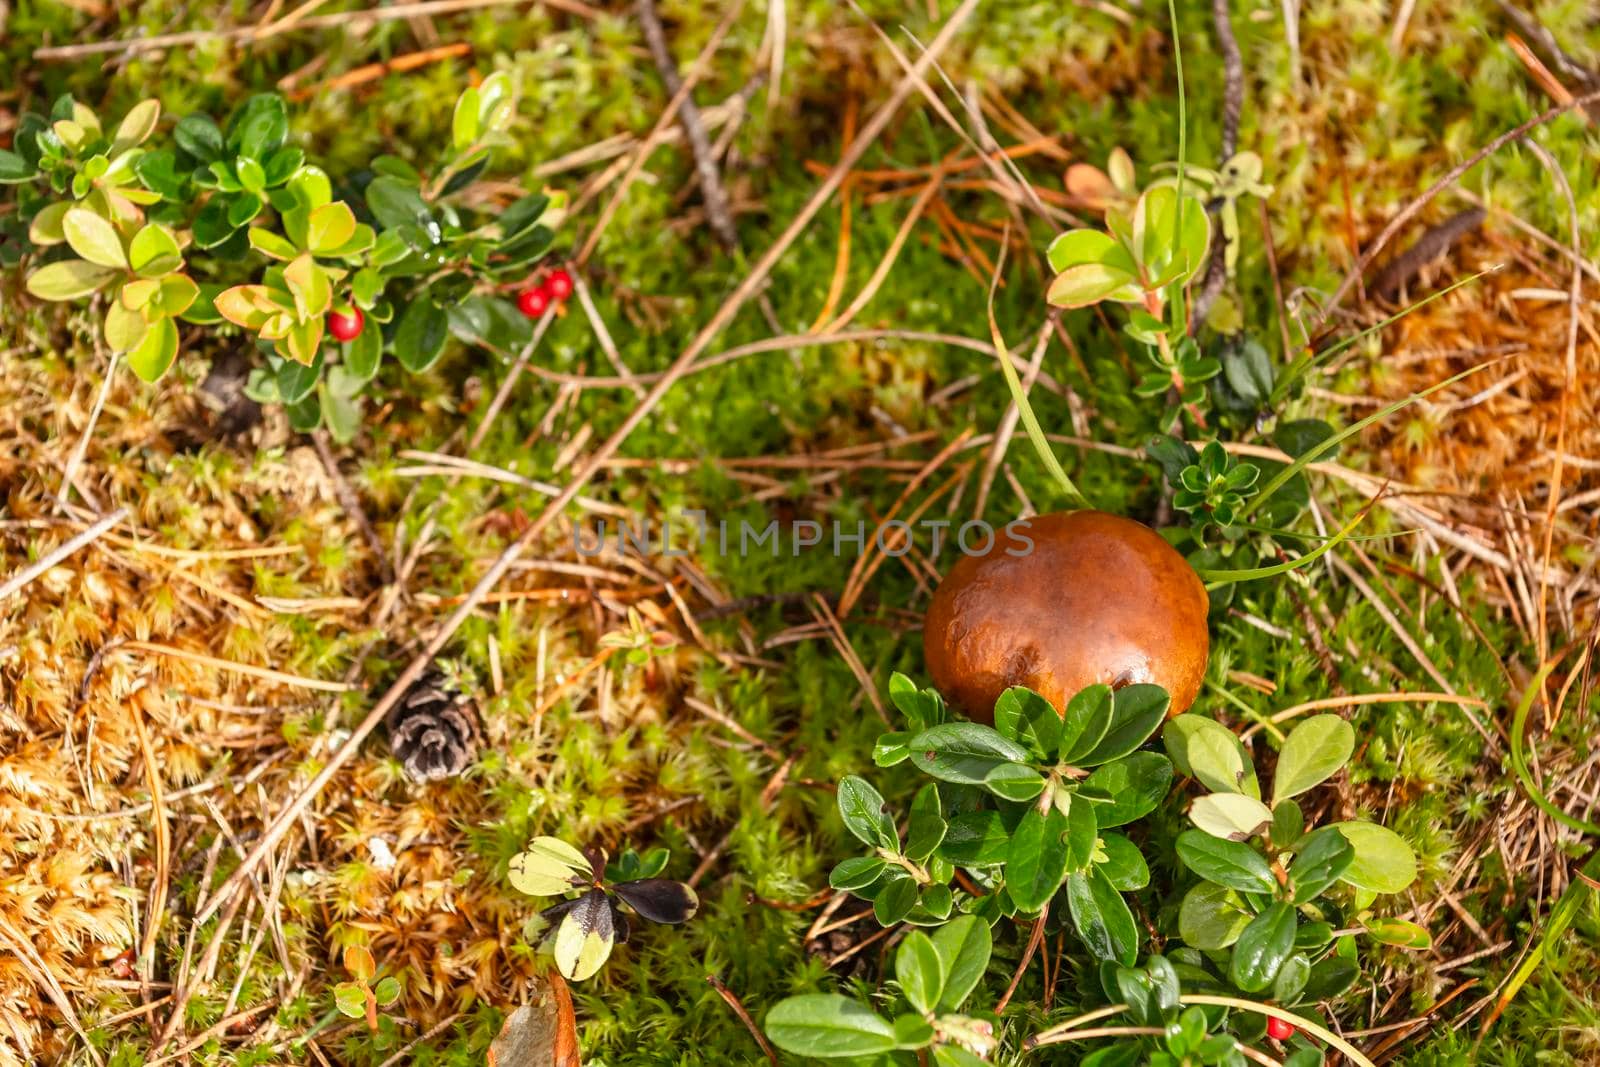 Mushroom in the forest by SNR